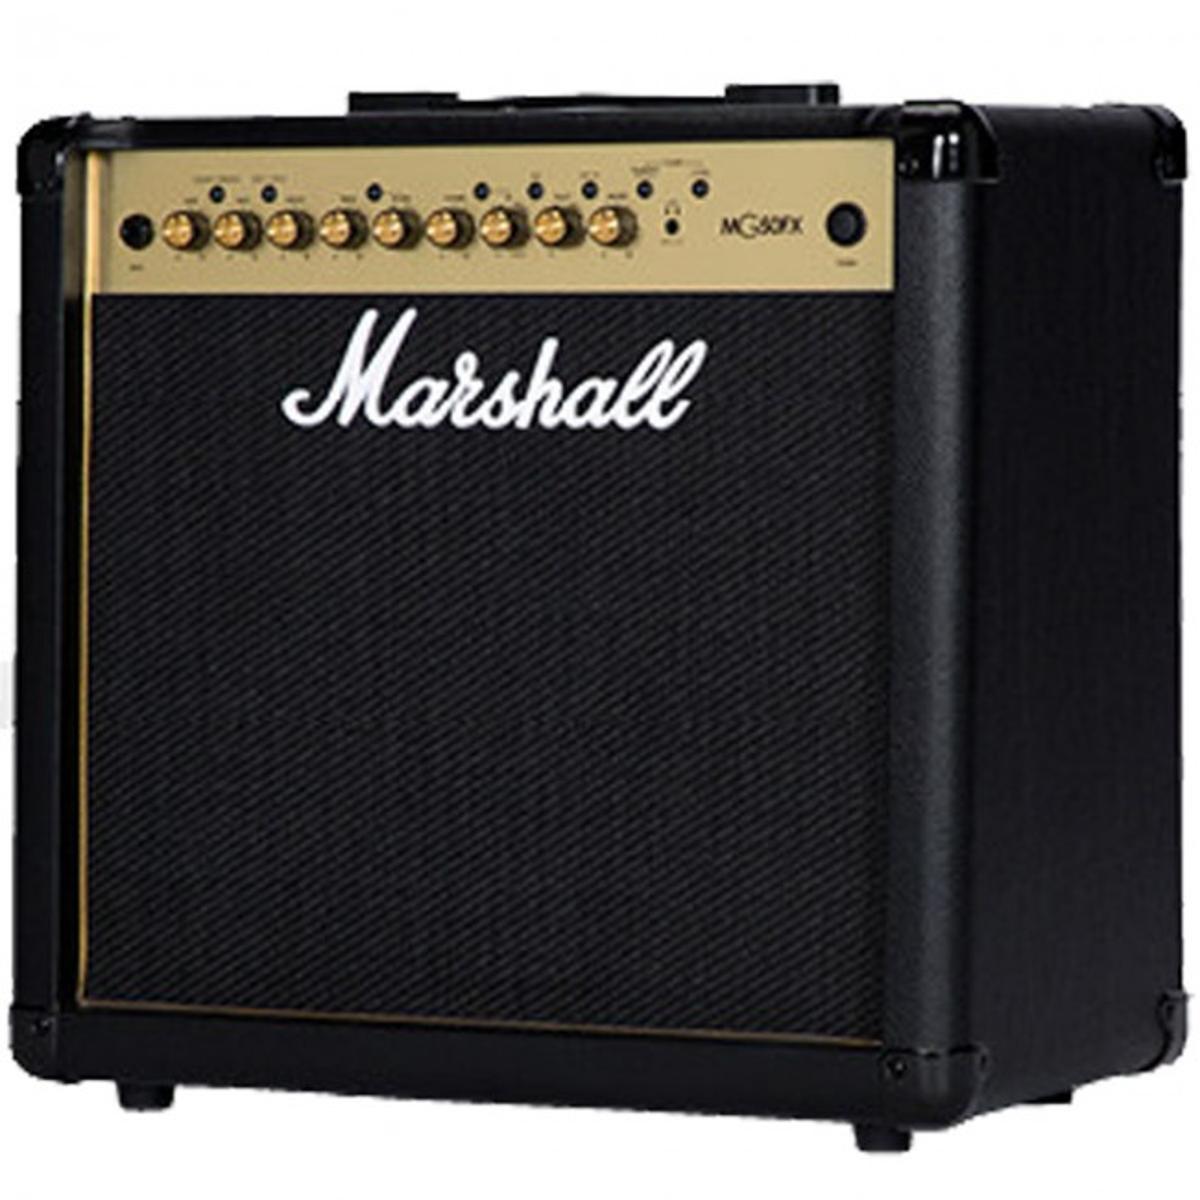 Marshall MG50GFX Guitar Amplifier w/ Effects 50w Combo Amp GOLD SERIES - OPEN BOX